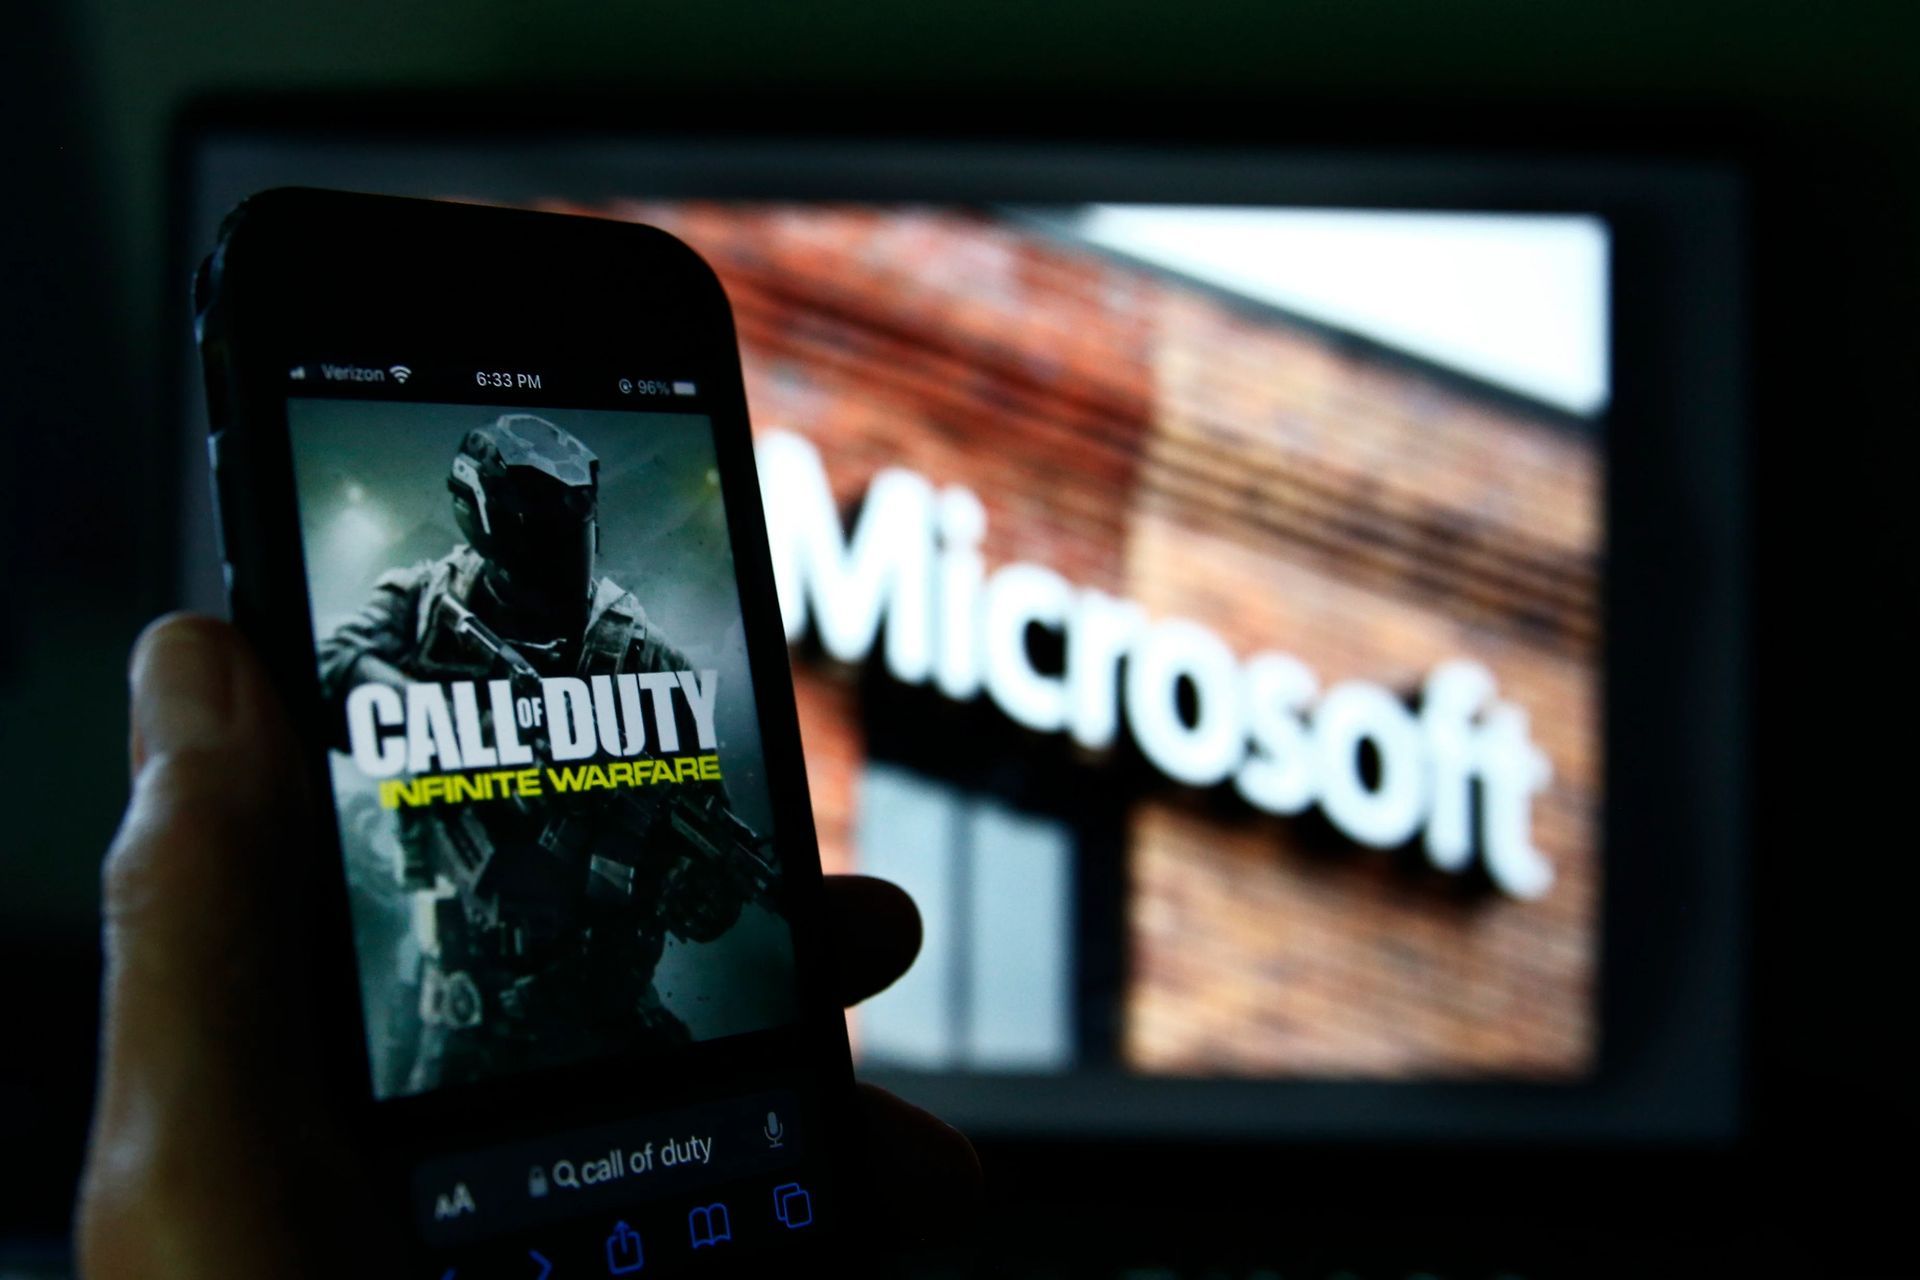 Microsoft buys Activision Blizzard